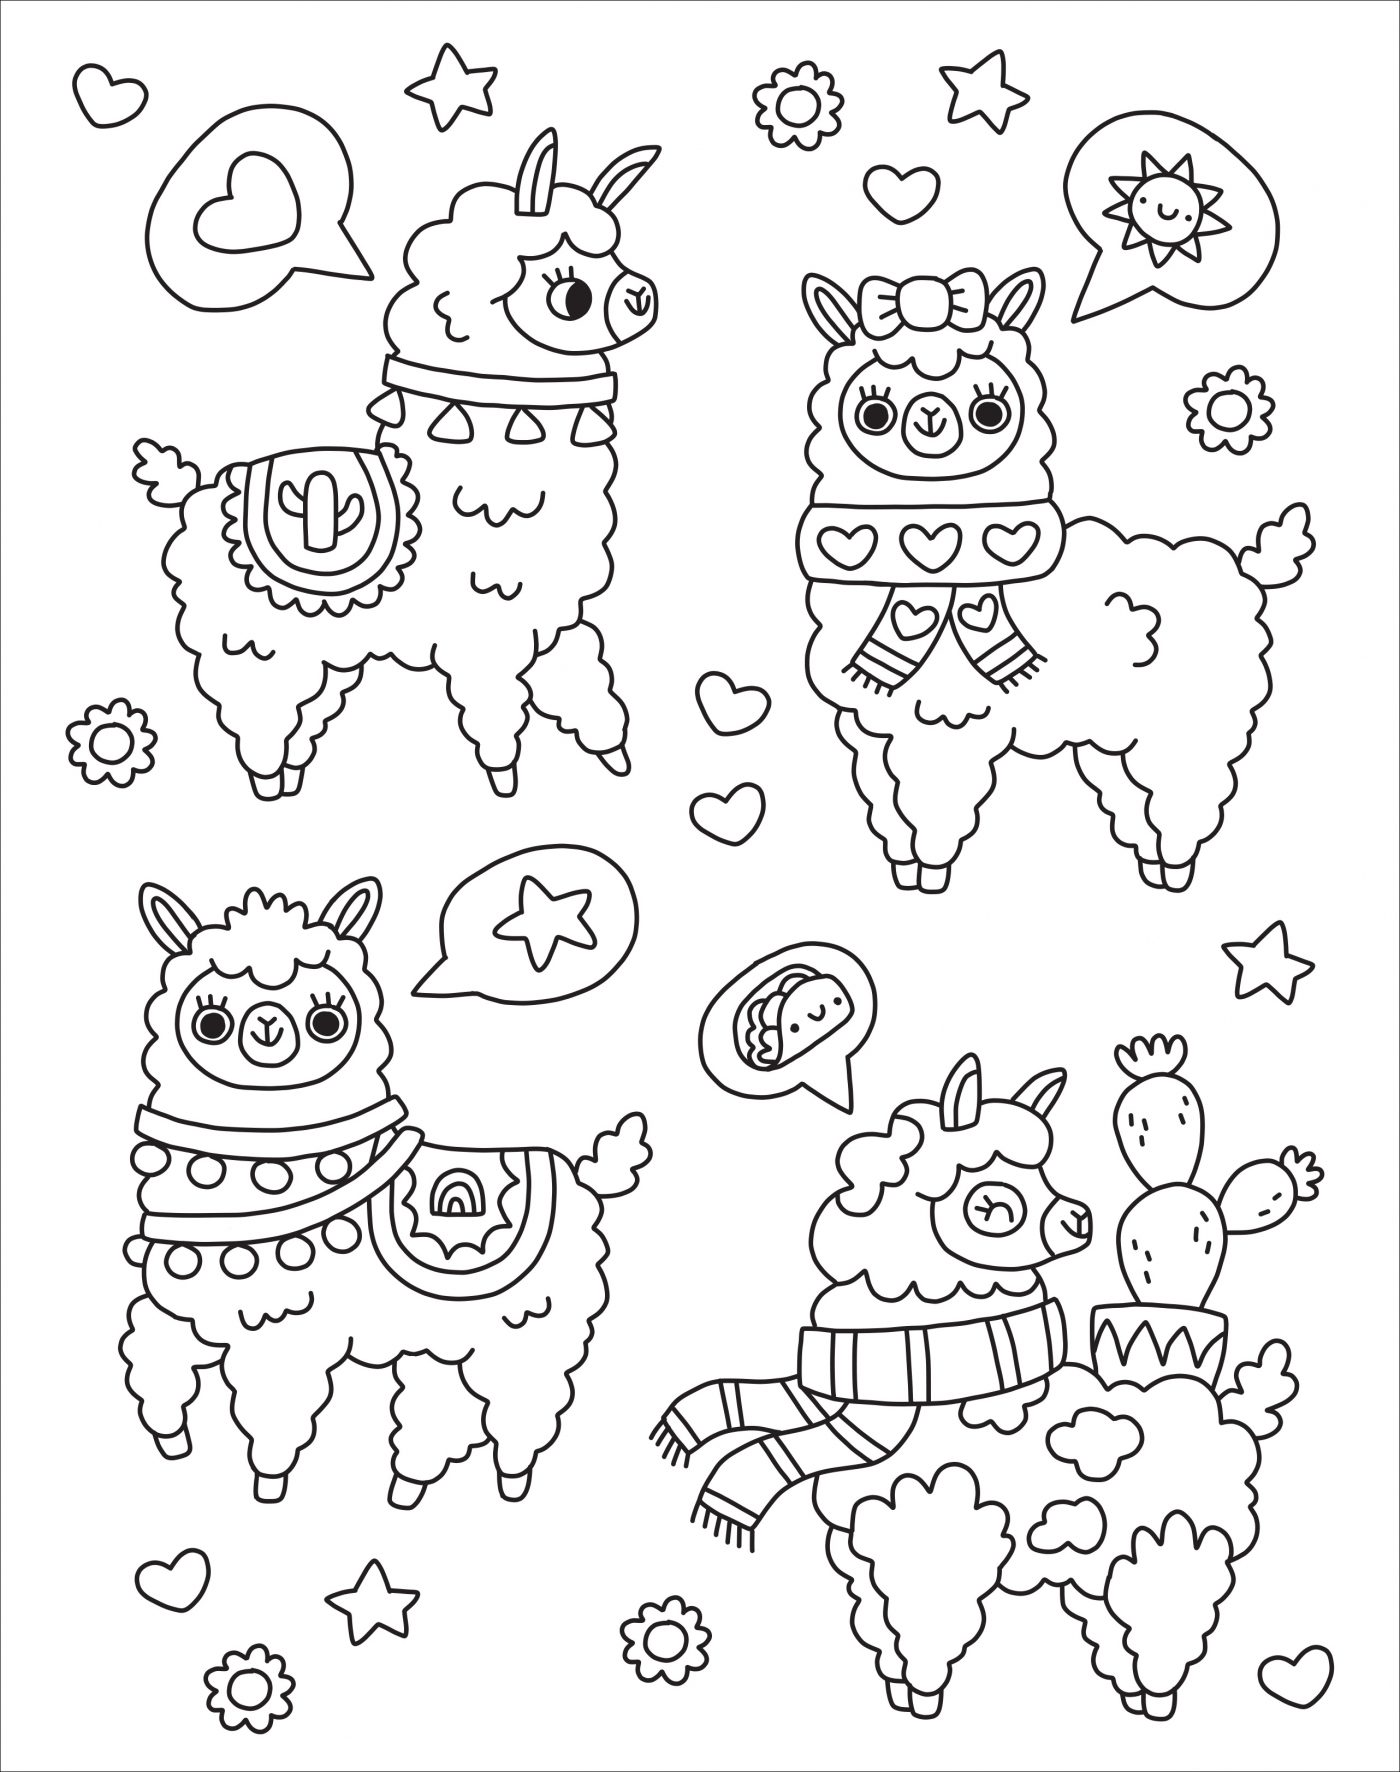 Kaleidoscope: Too Cute! Coloring Downloadable - Silver Dolphin Books